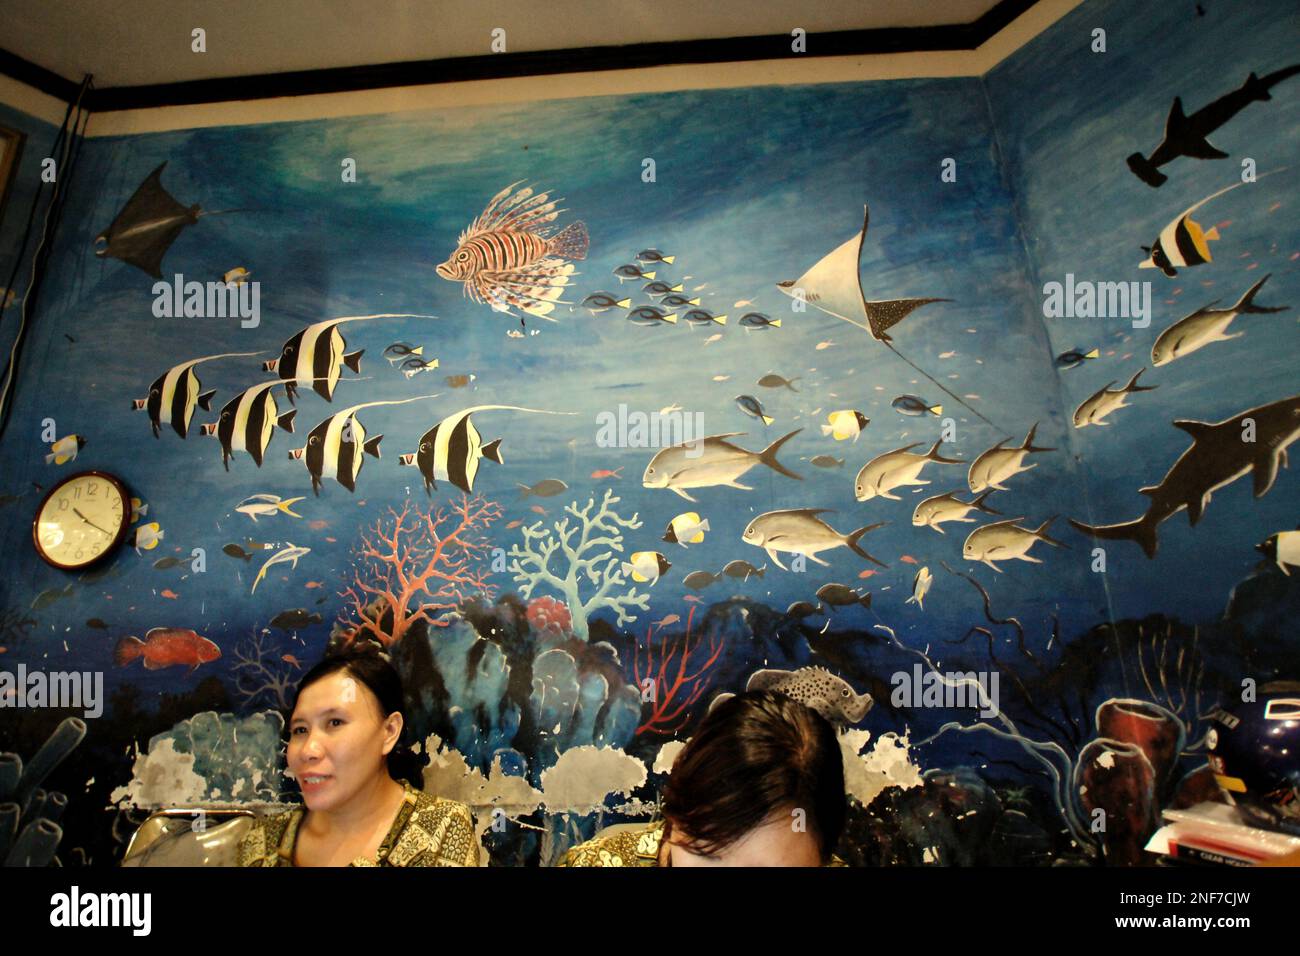 Receptionists respond to a query of a customer at the front desk of a seafood restaurant in Manado, a coastal city and the capital of North Sulawesi province of Indonesia. According to FAO in their latest report called The State of World Fisheries and Aquaculture 2022, Indonesia is the third largest producer of world's fisheries and aquaculture production of aquatic animals. Five countries—China, India, Indonesia, Vietnam, and Peru—are responsible for about 58 percent of the world's production. Indonesia is also one of the countries where aquatic foods contribute half or more of total... Stock Photo